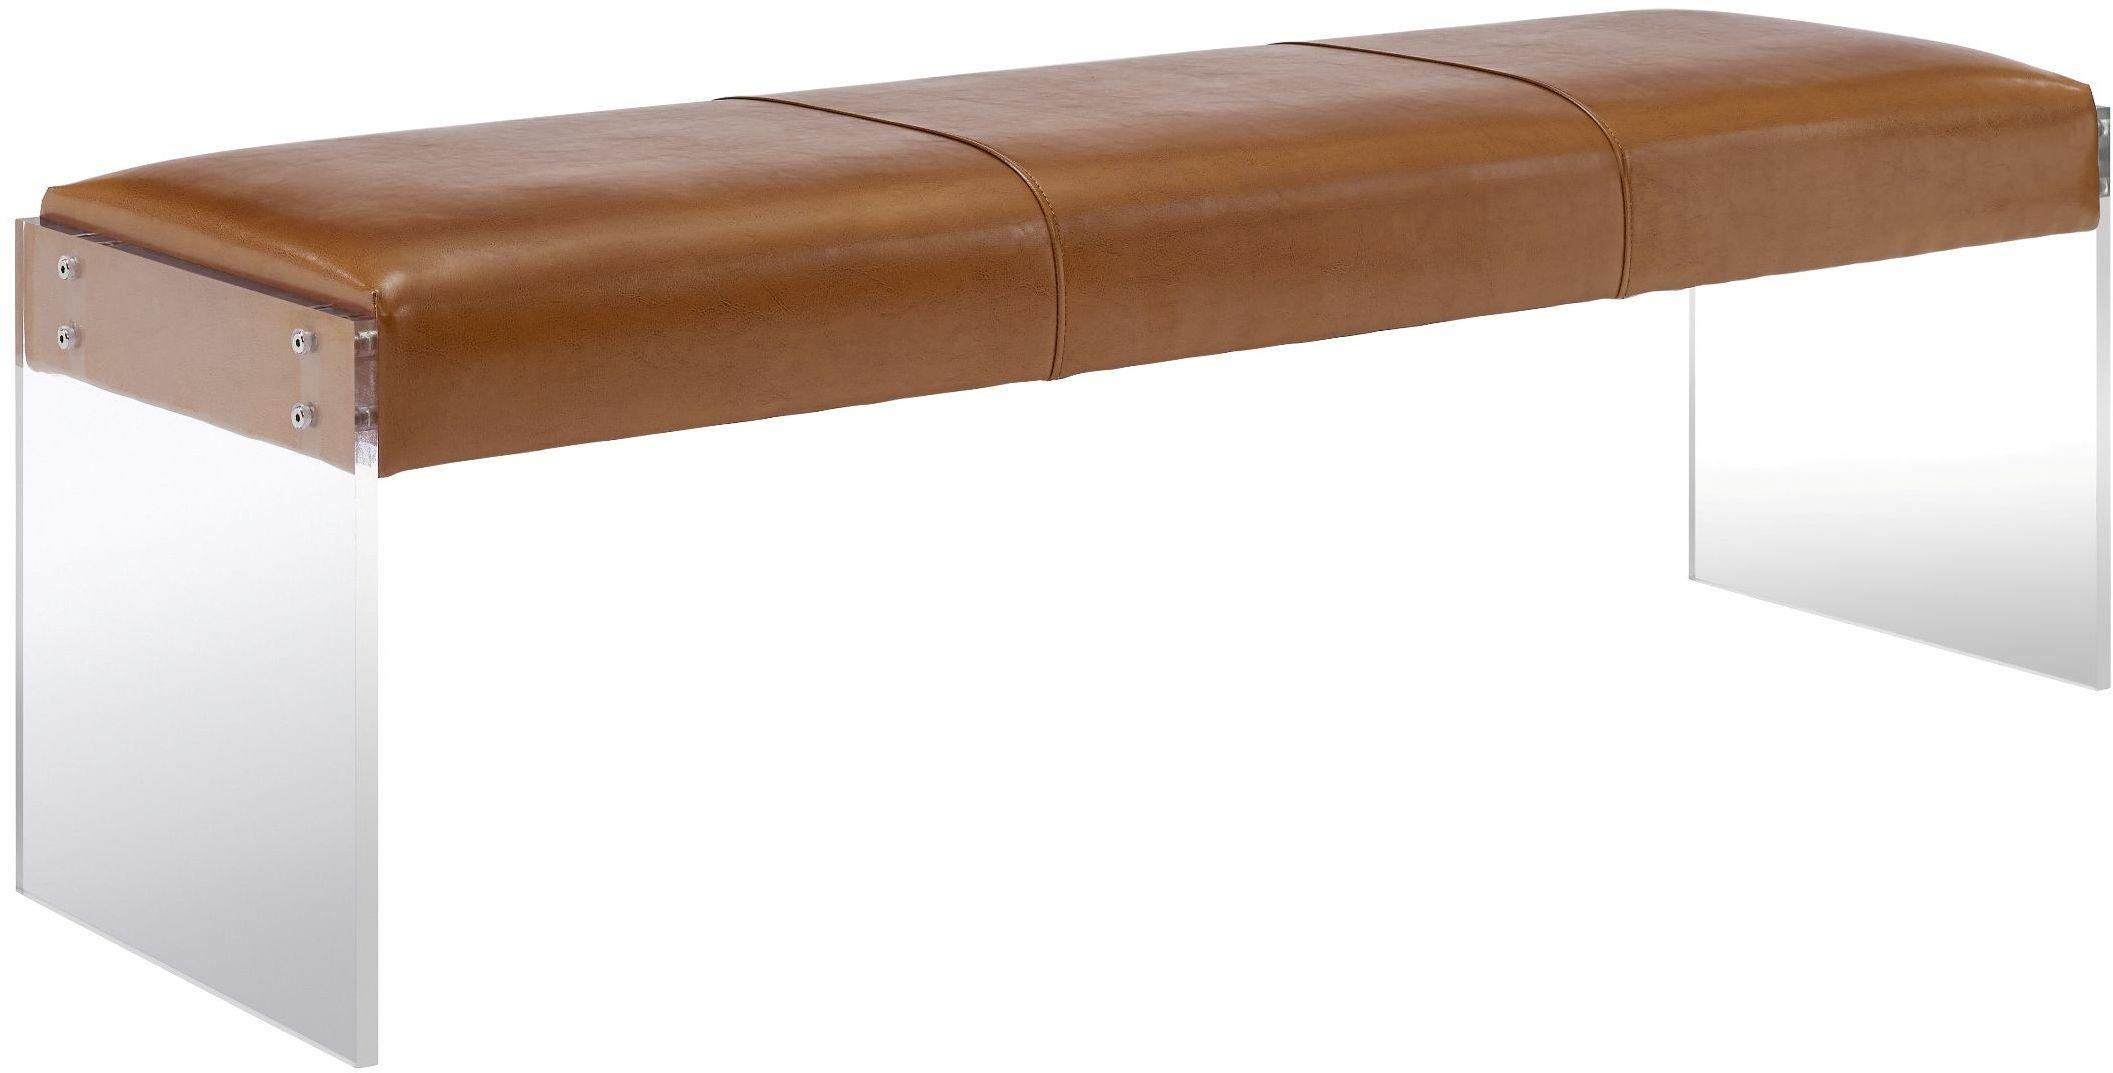 Tov Furniture Benches - Envy Brown Leather/Acrylic Bench